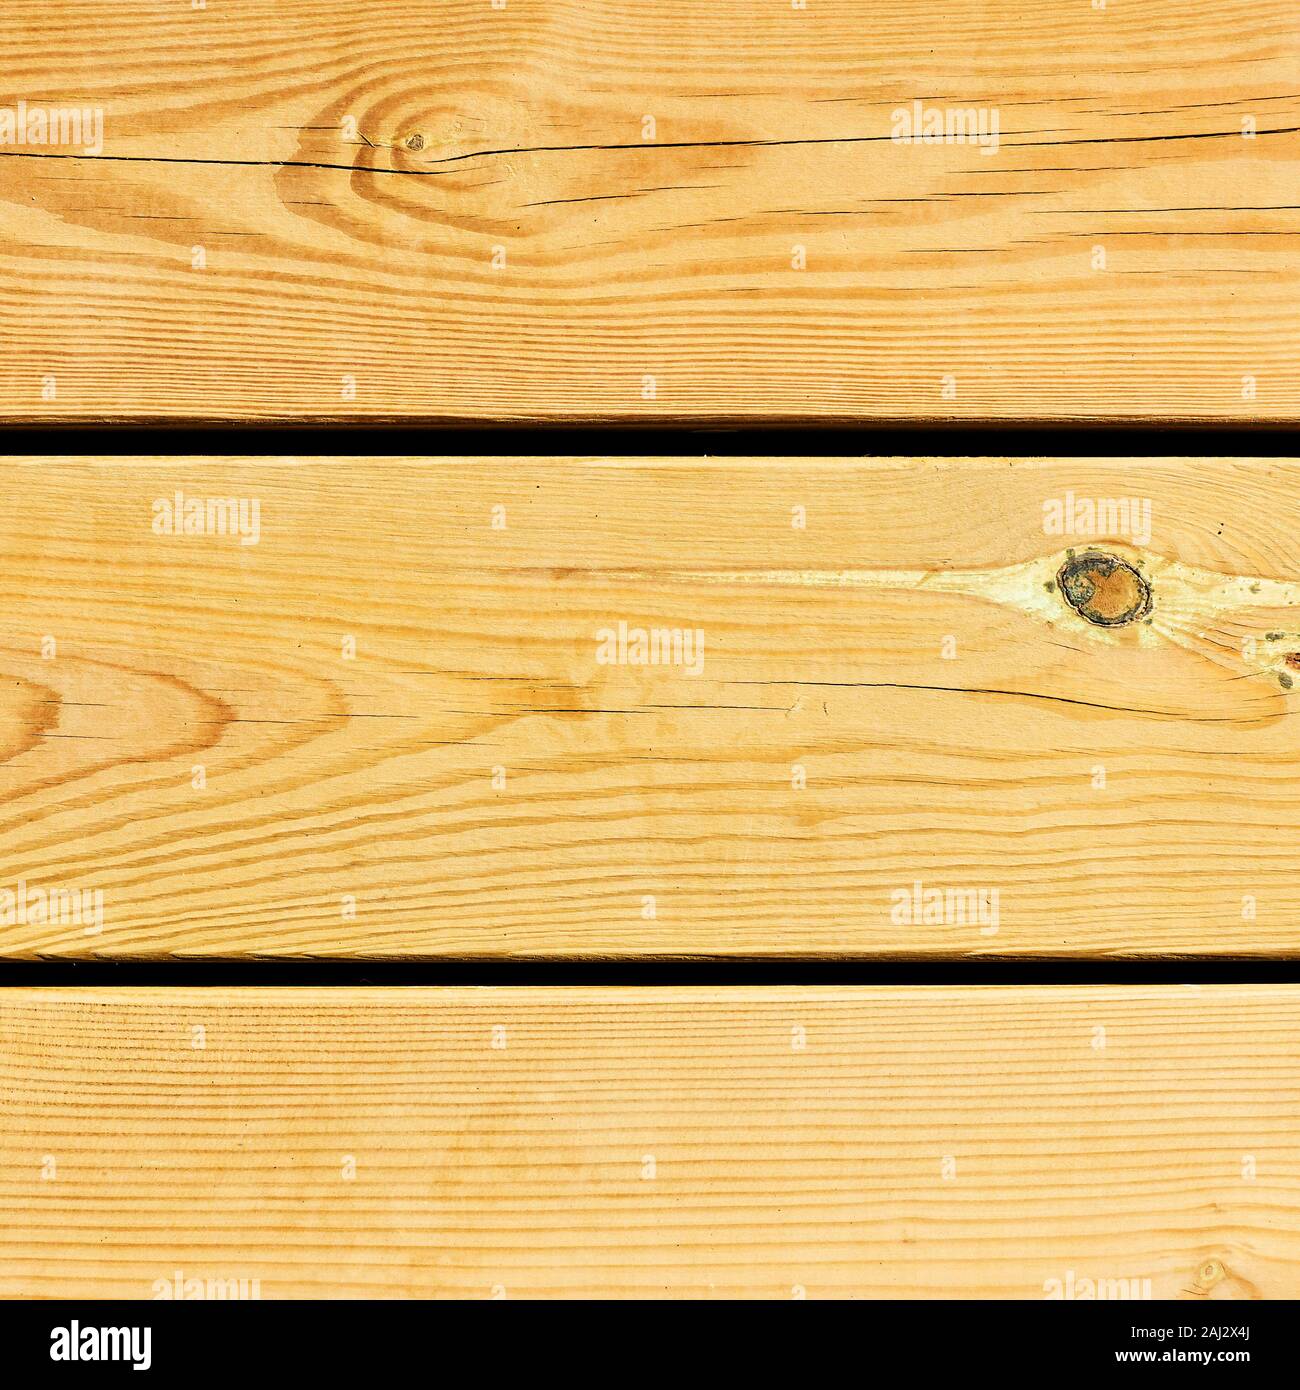 Light wooden planks with smooth surface - Wood texture and background Stock Photo